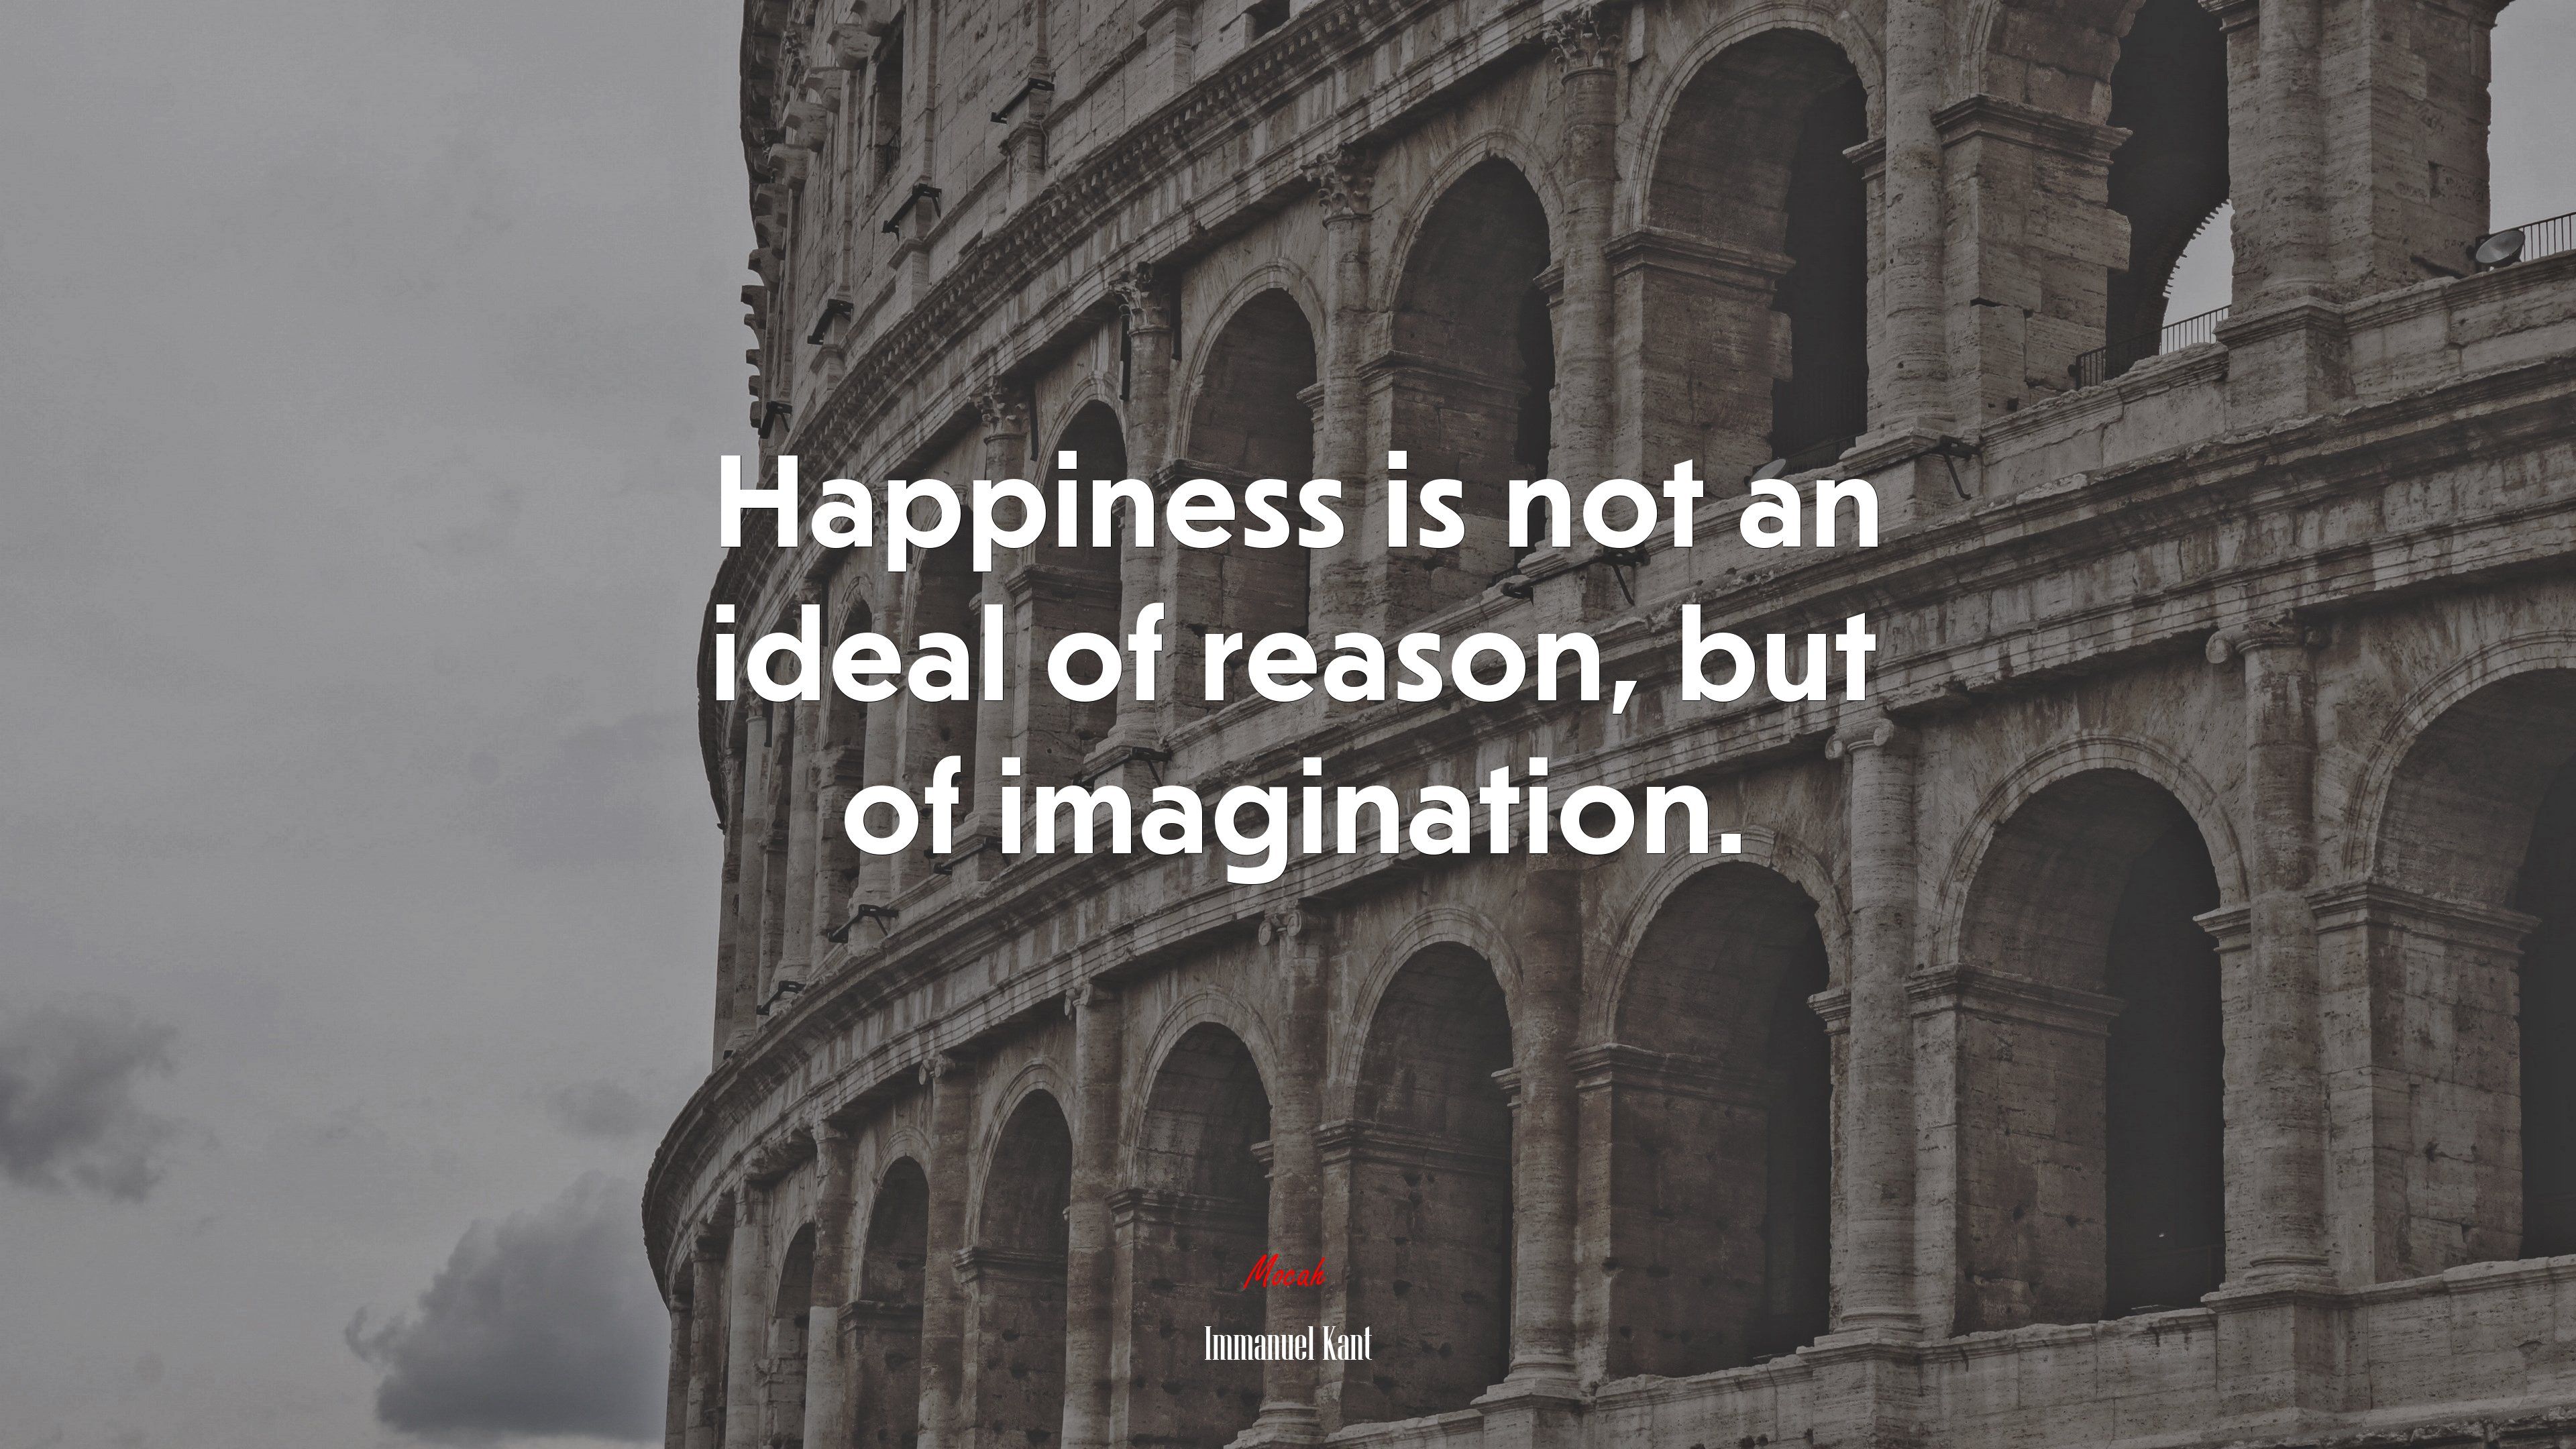 Happiness is not an ideal of reason, but of imagination. Immanuel Kant quote, 4k wallpaper. Mocah.org HD Desktop Wallpaper